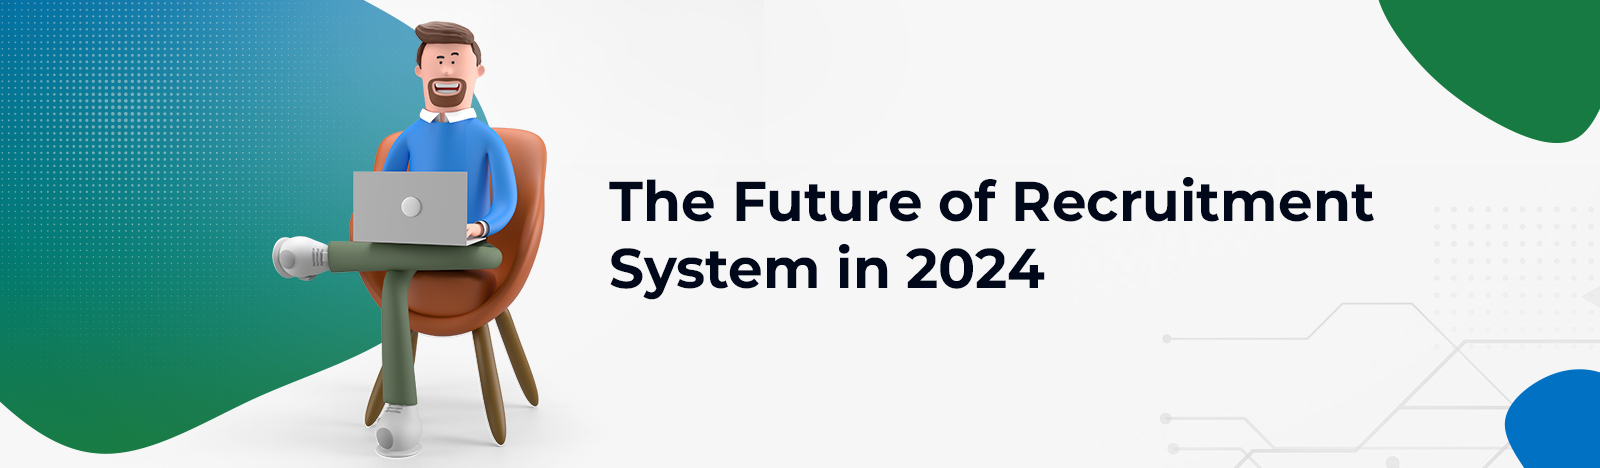 The Future of Recruitment Management System in 2024